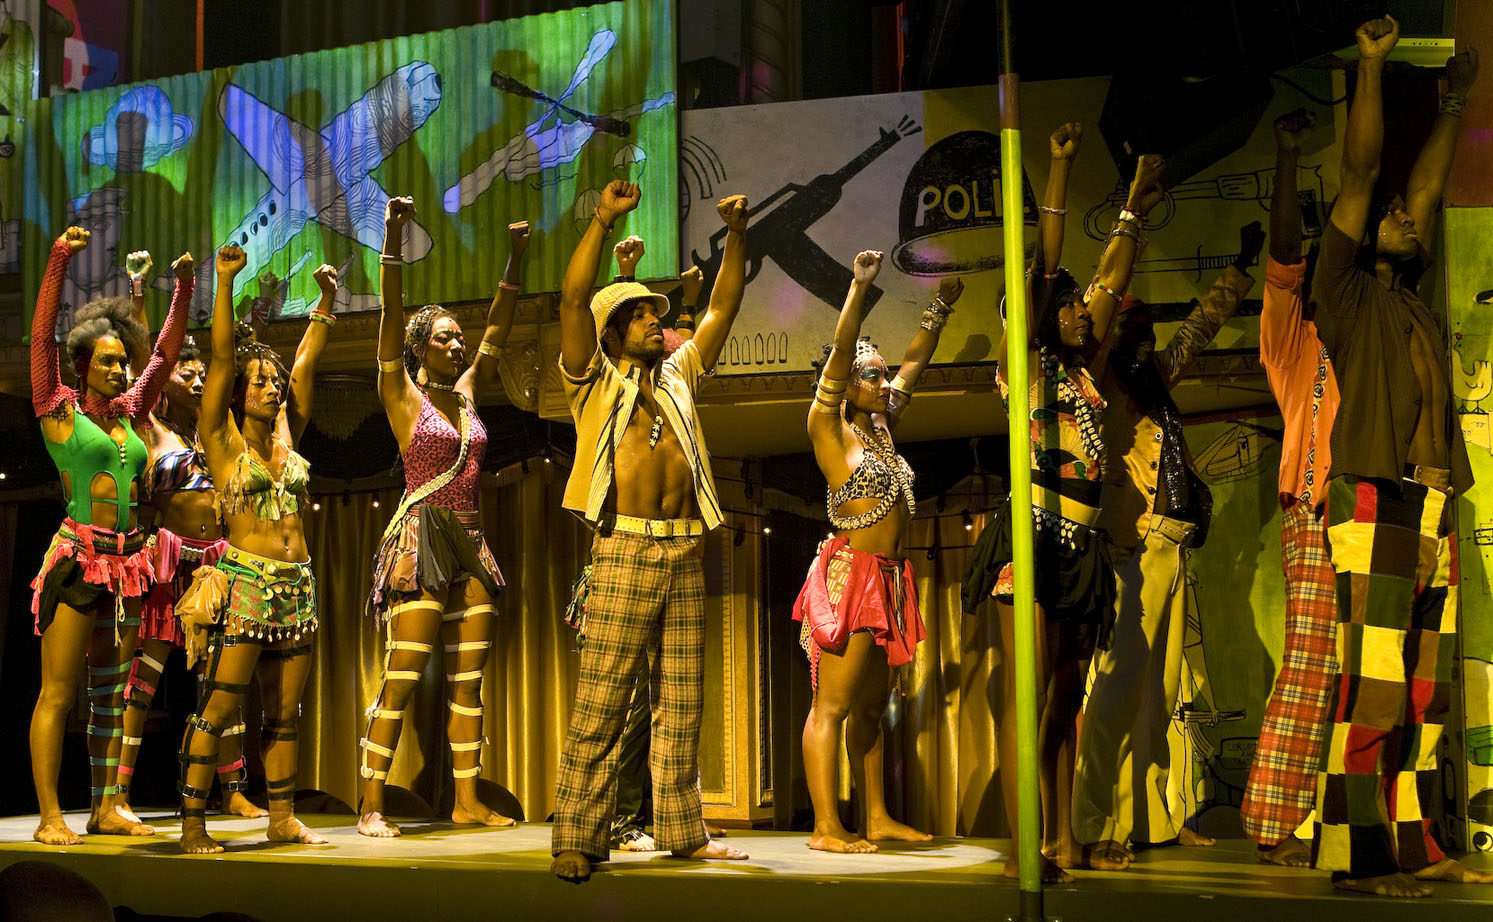 FELA!’s Action is in the Afrobeat